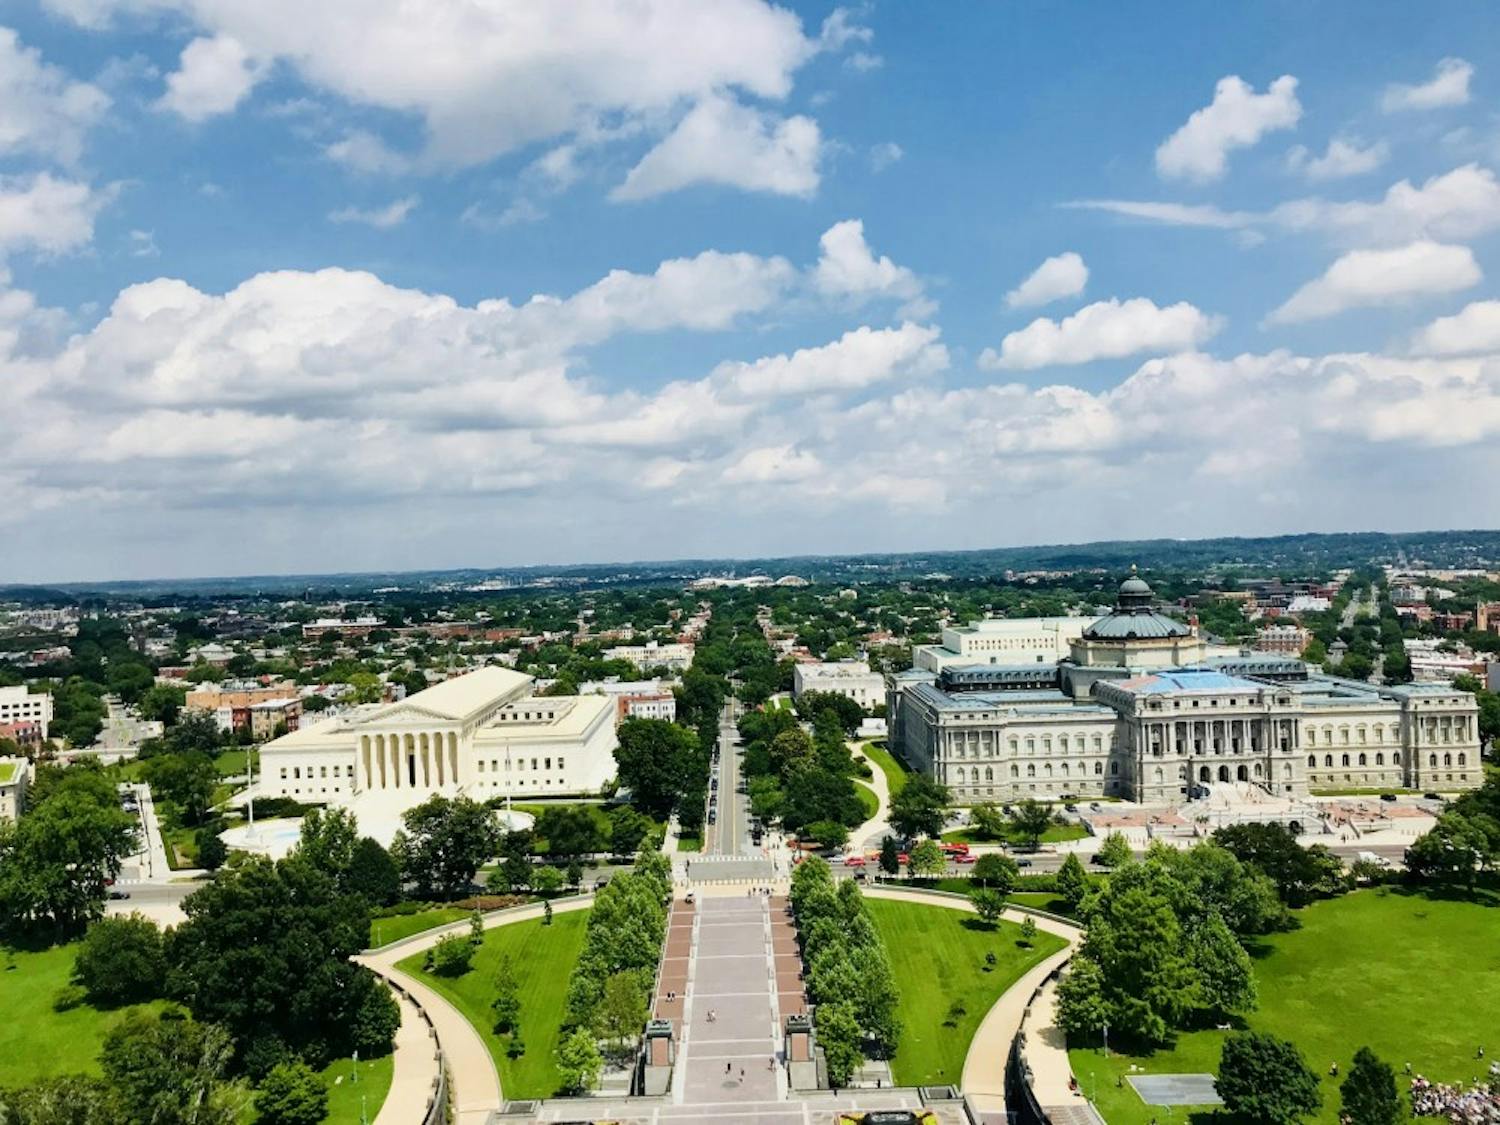 The view of the Supreme Court building from the top of the U.S. Capitol dome in June 2018